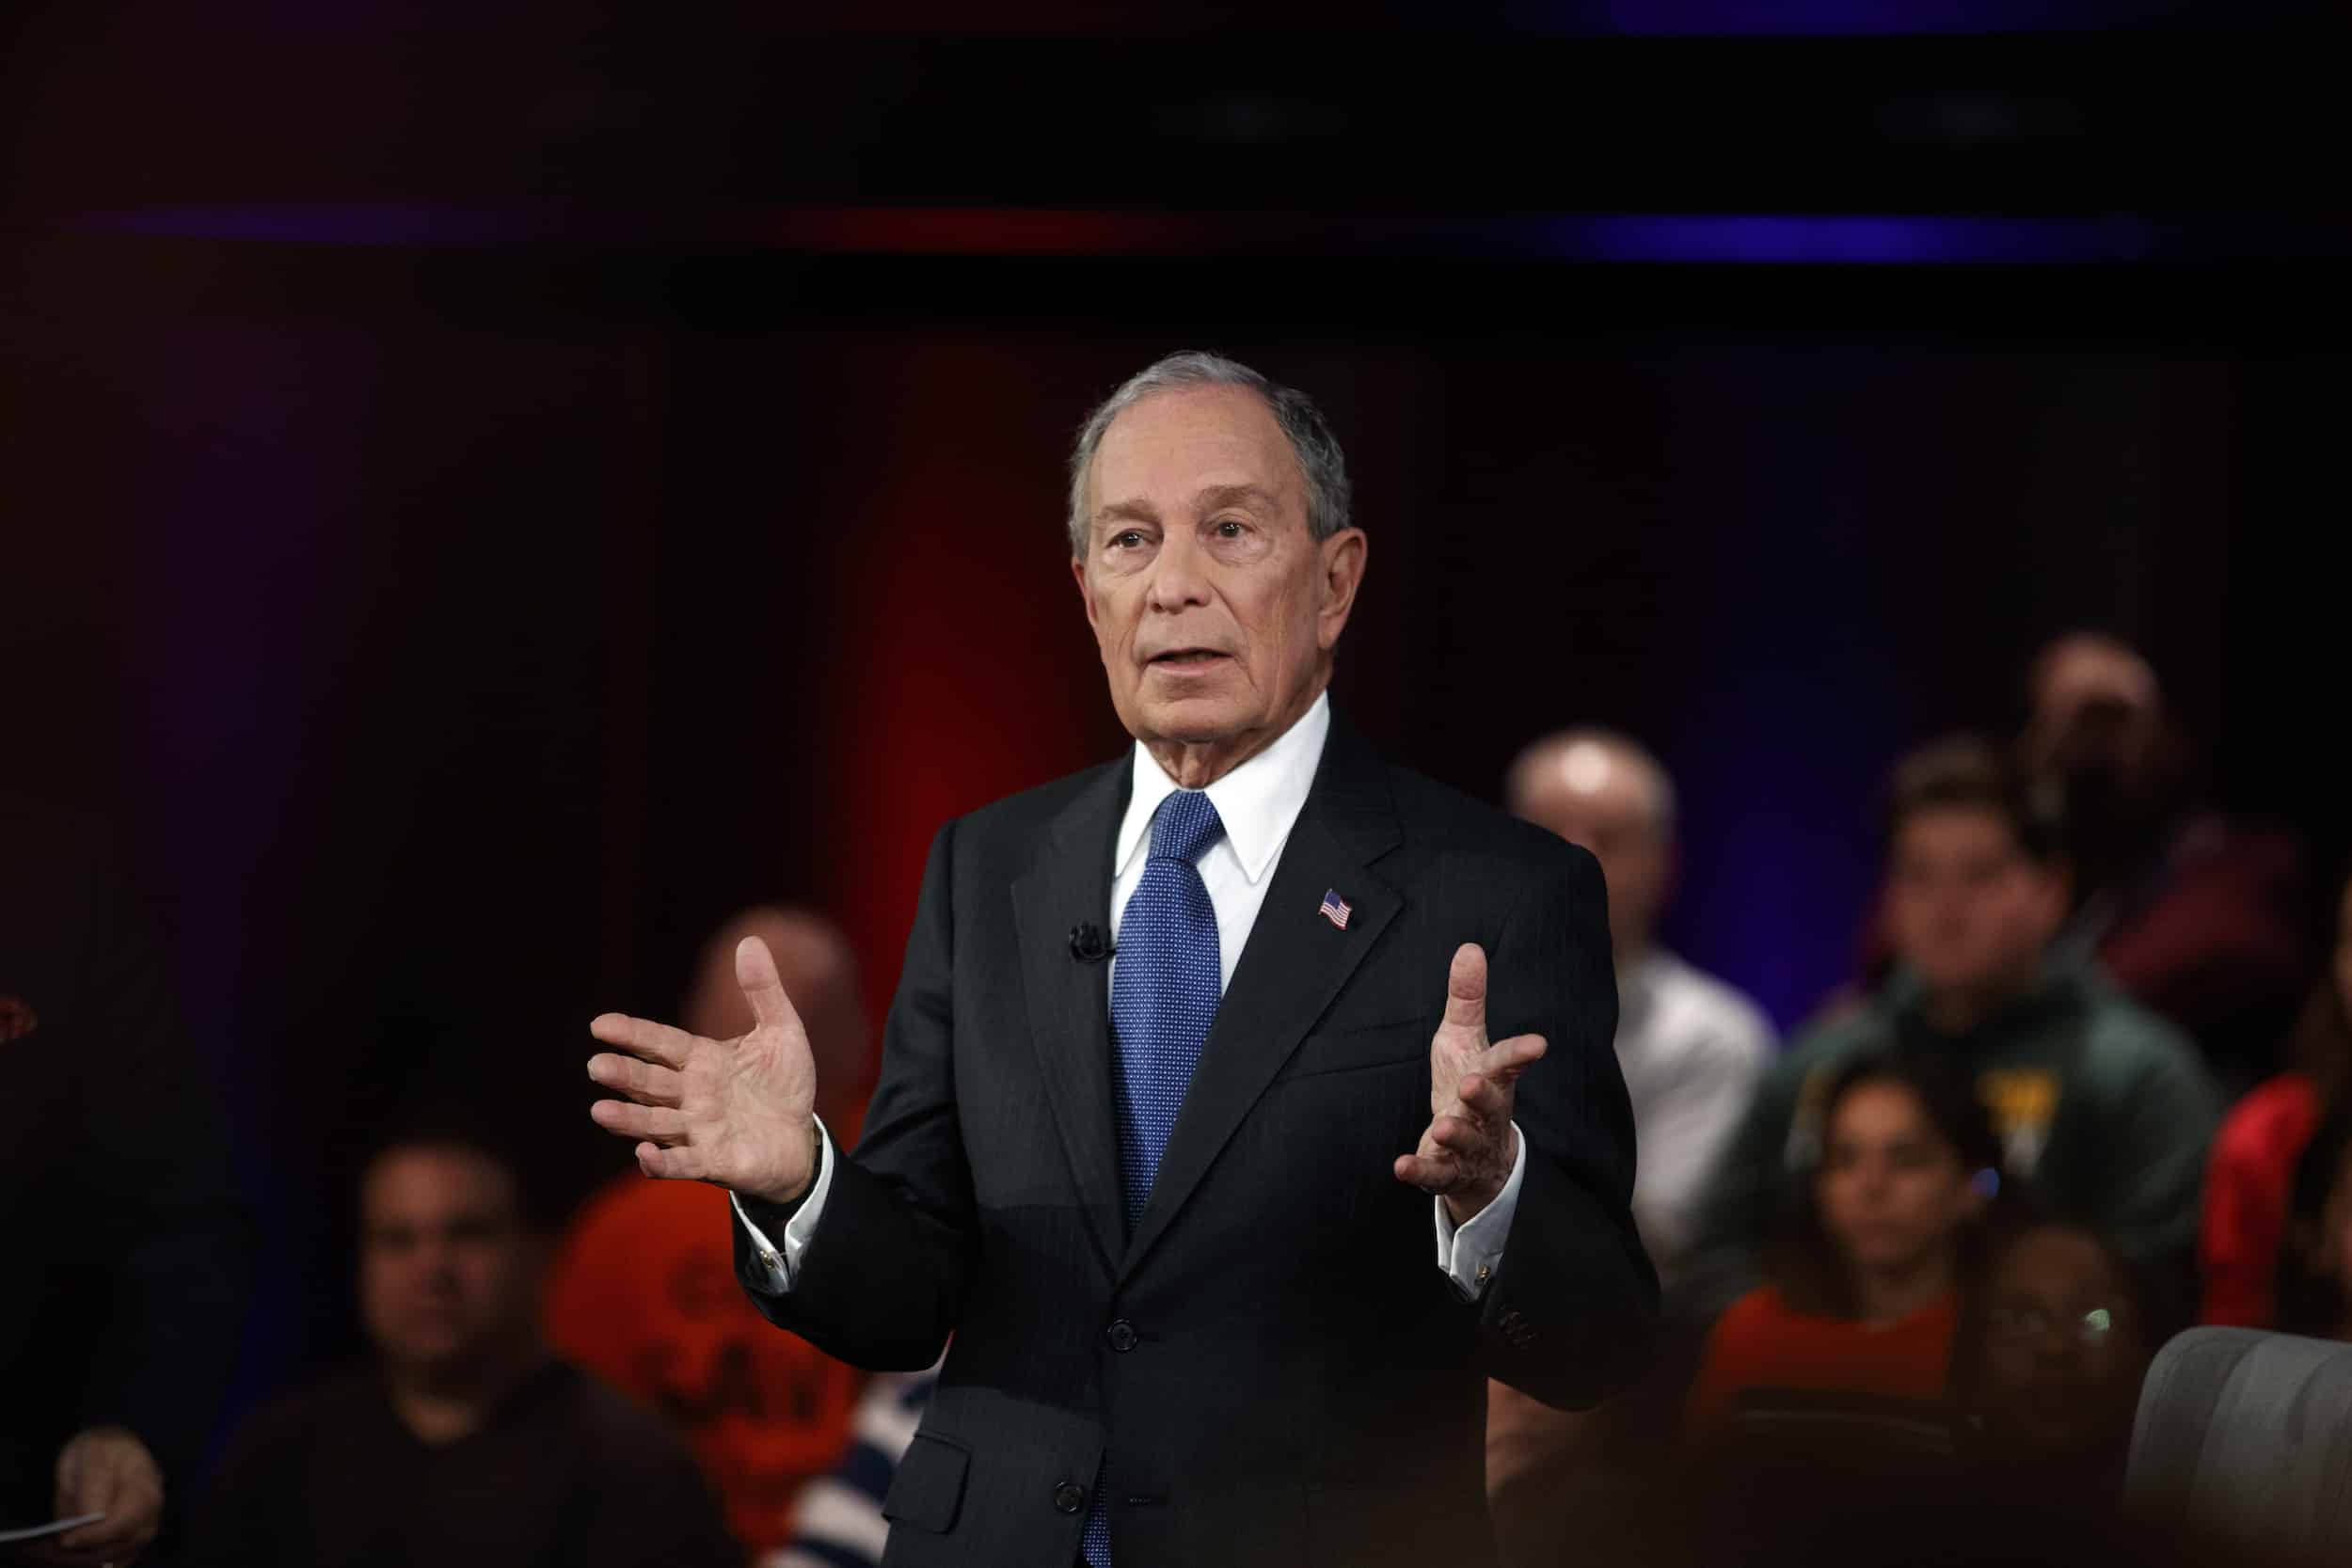 Mike Bloomberg’s Big Spending Fails to Impact Swing-State
Elections 1